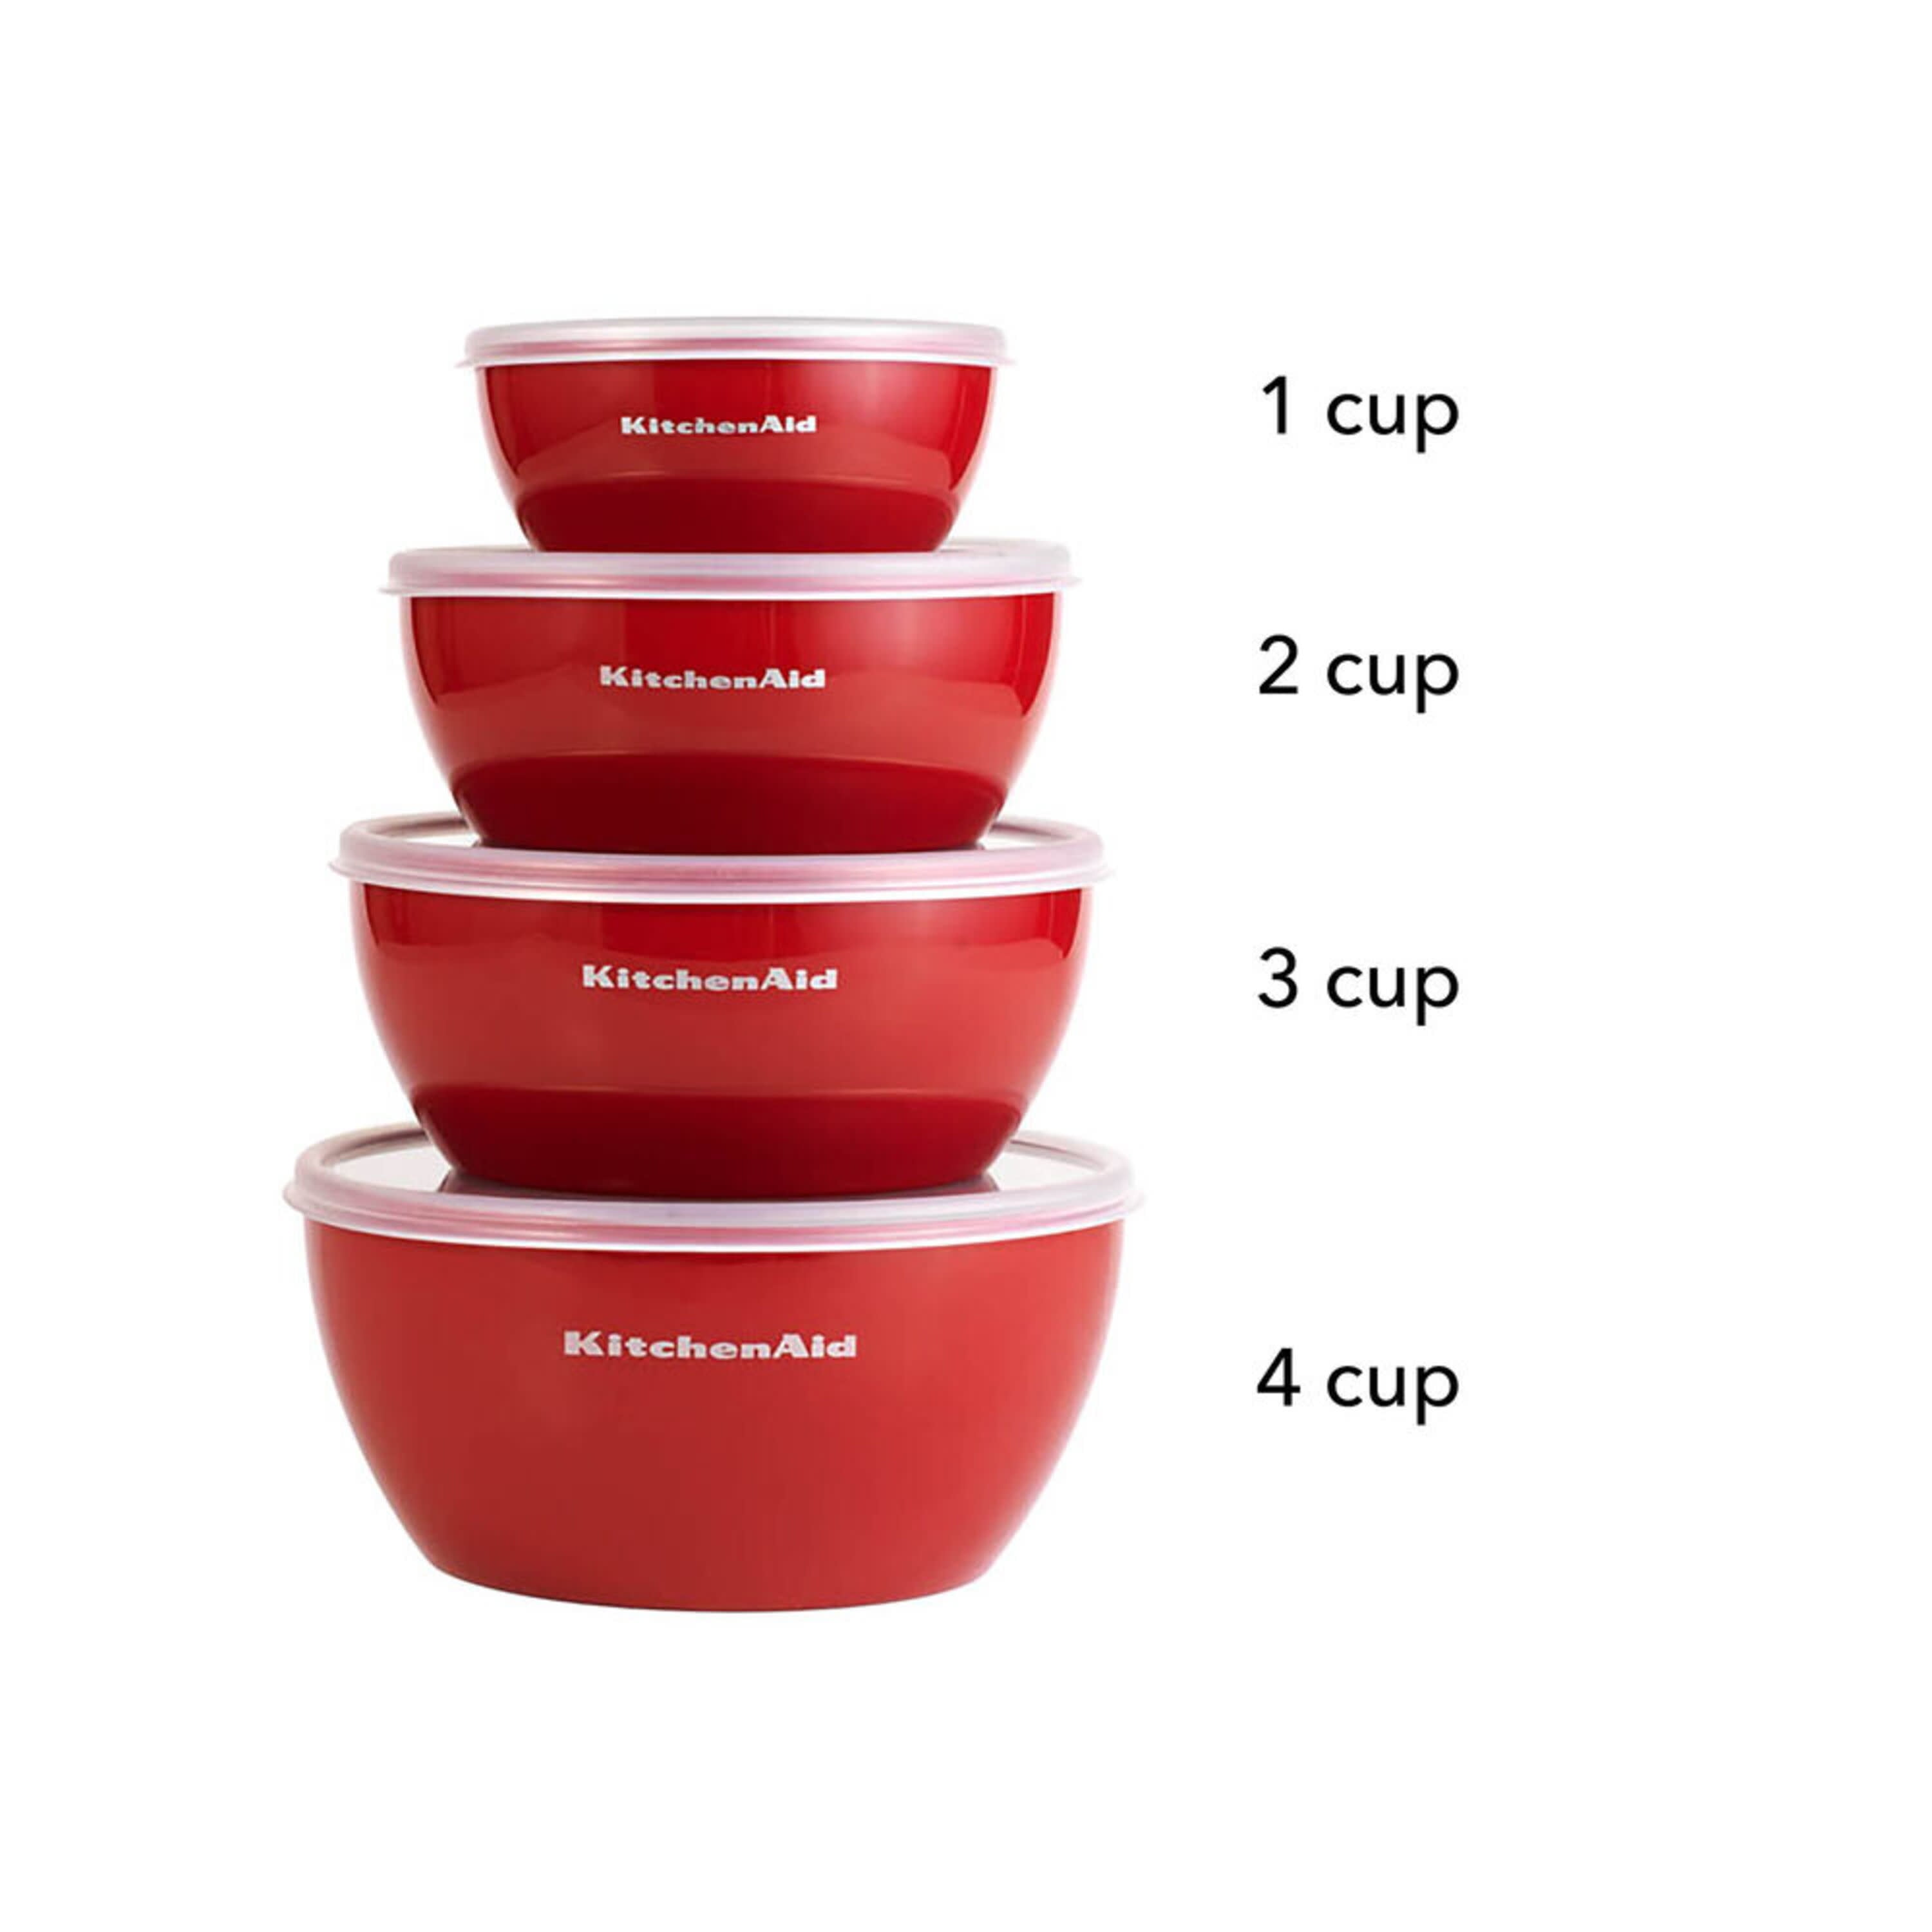 KitchenAid Classic 3 Pieces Mixing Bowls, Empire Red & Reviews